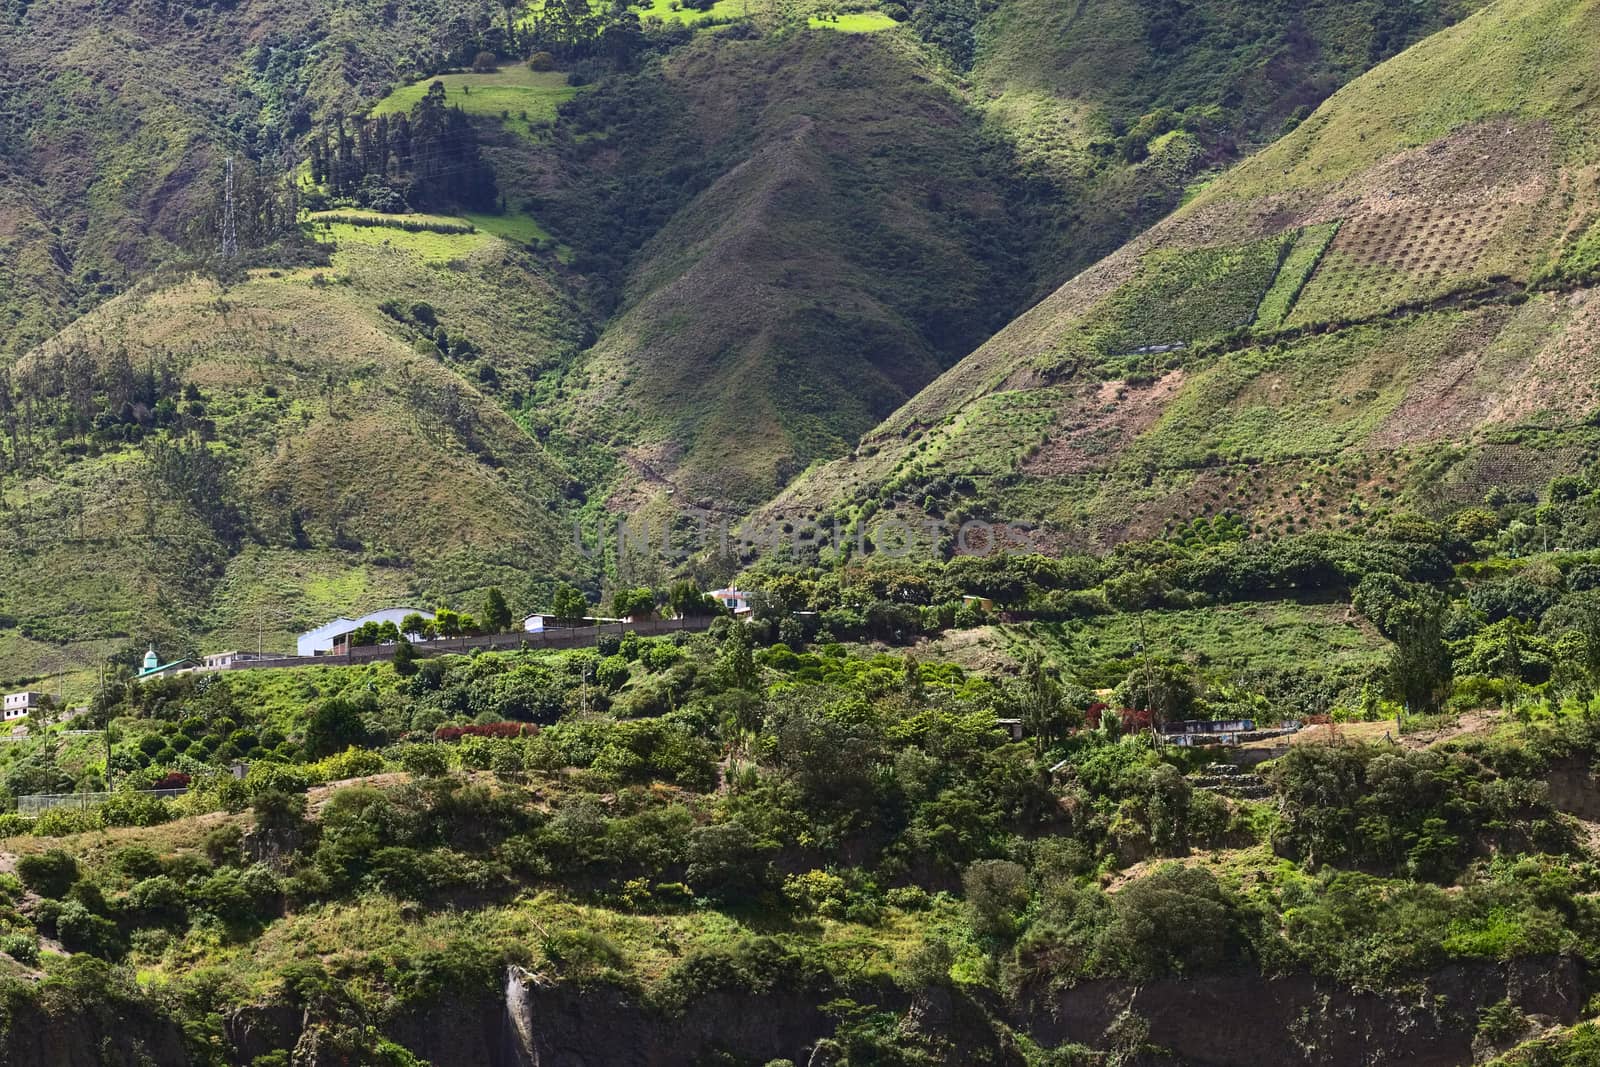 Rural hillside landscape with houses, orchards and trees along the road between Ambato and Banos in Tungurahua Province in Central Ecuador